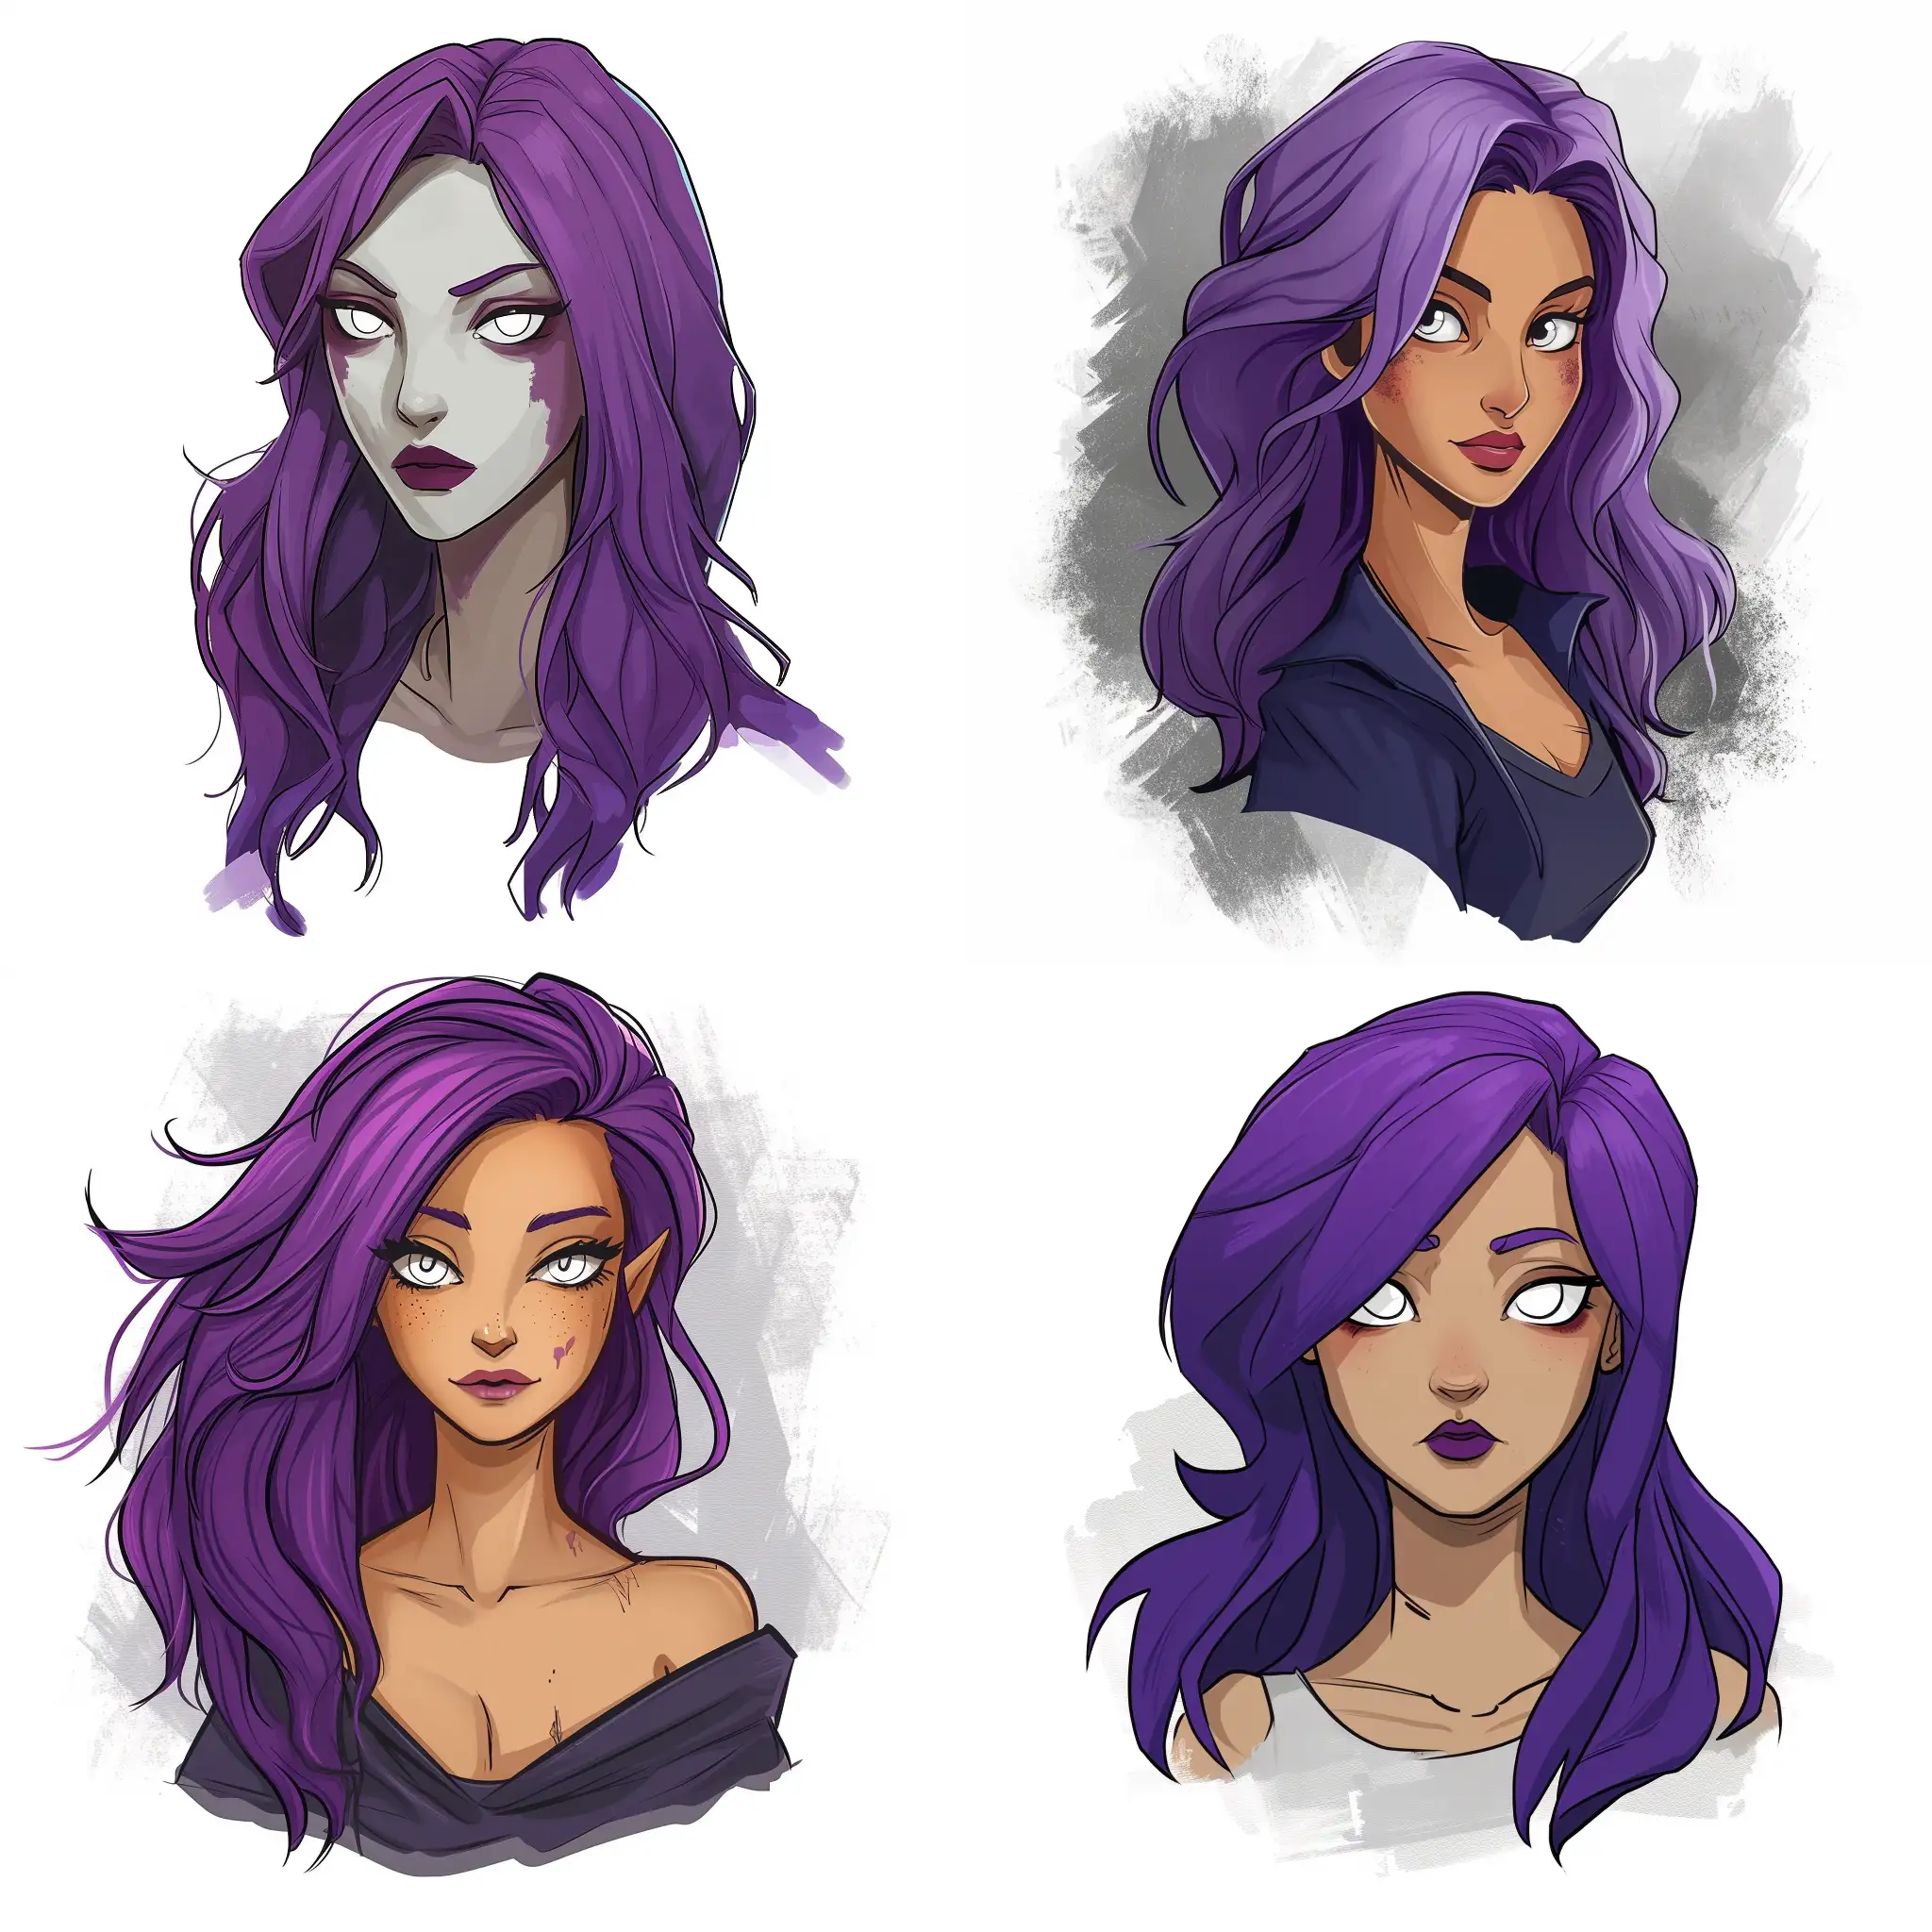 A character for the game. a woman with purple hair and white eyes. Draw in a cartoon style with hand paint elements